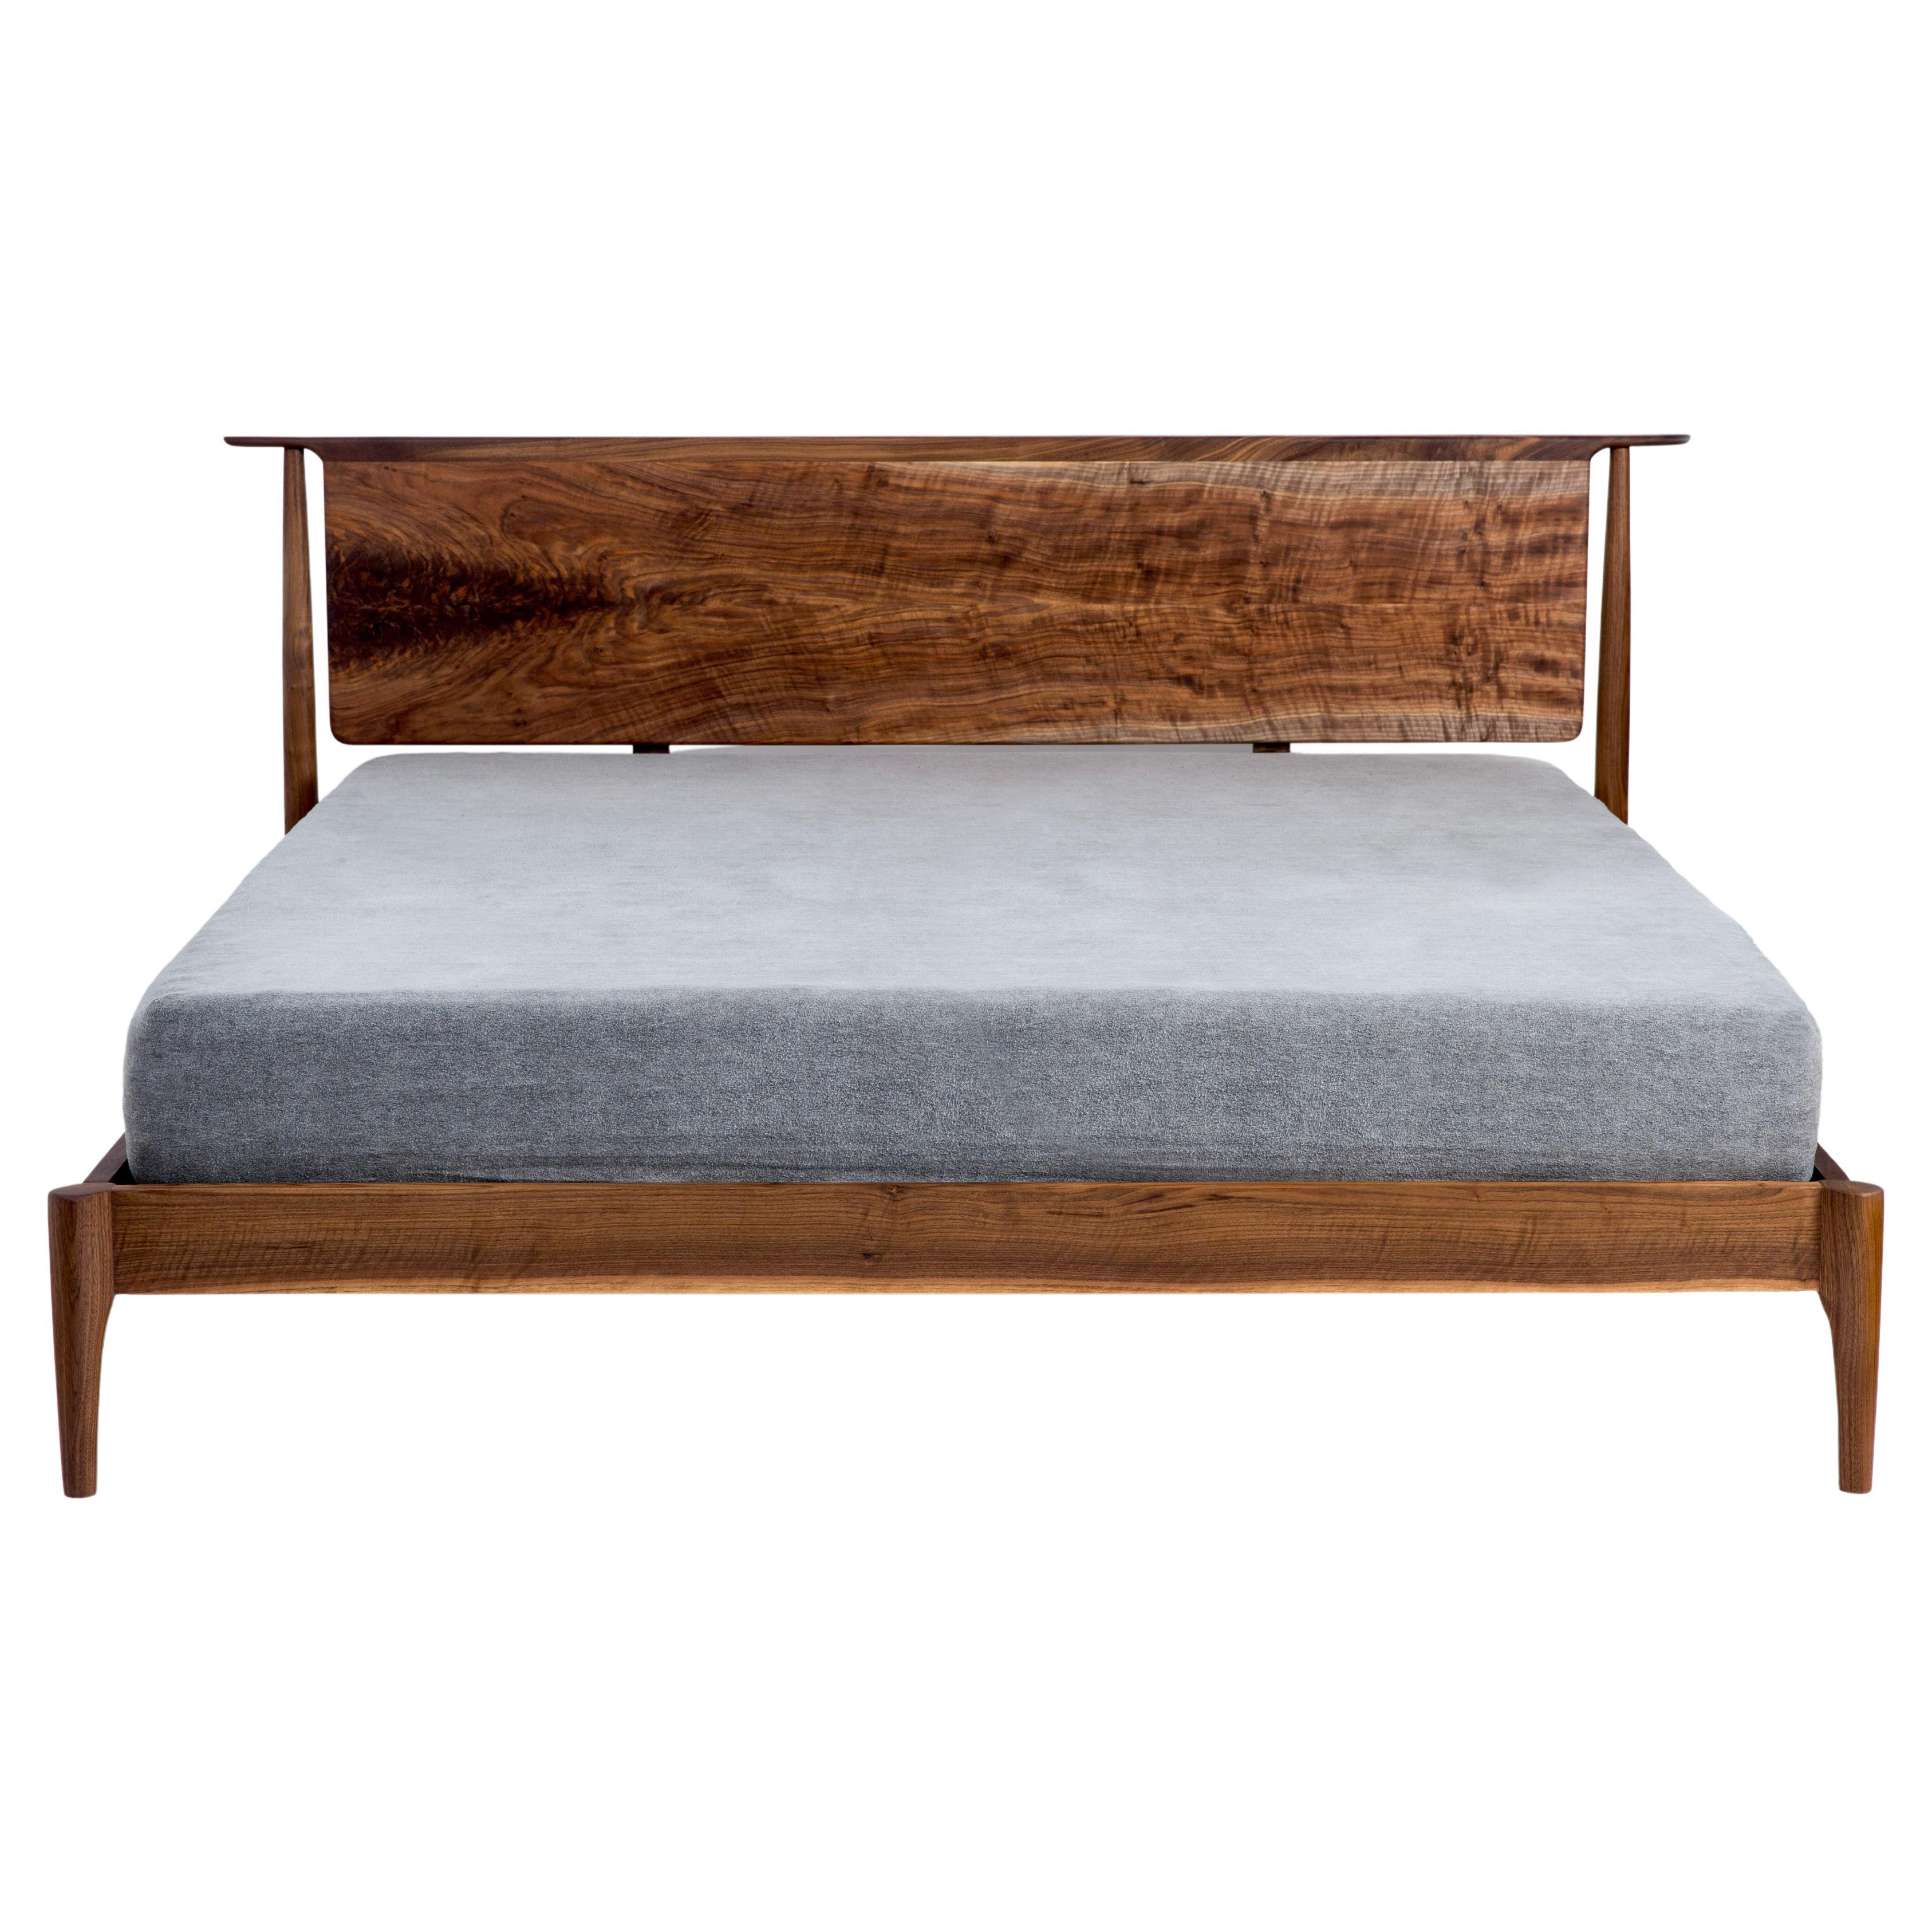 We hope this bed frame is considered both novel and interesting as well as timeless. Built from all solid wood here in our studio in Vancouver Washington. A bed with soul. Clean and interesting lines that flow in and out in every direction.

Our